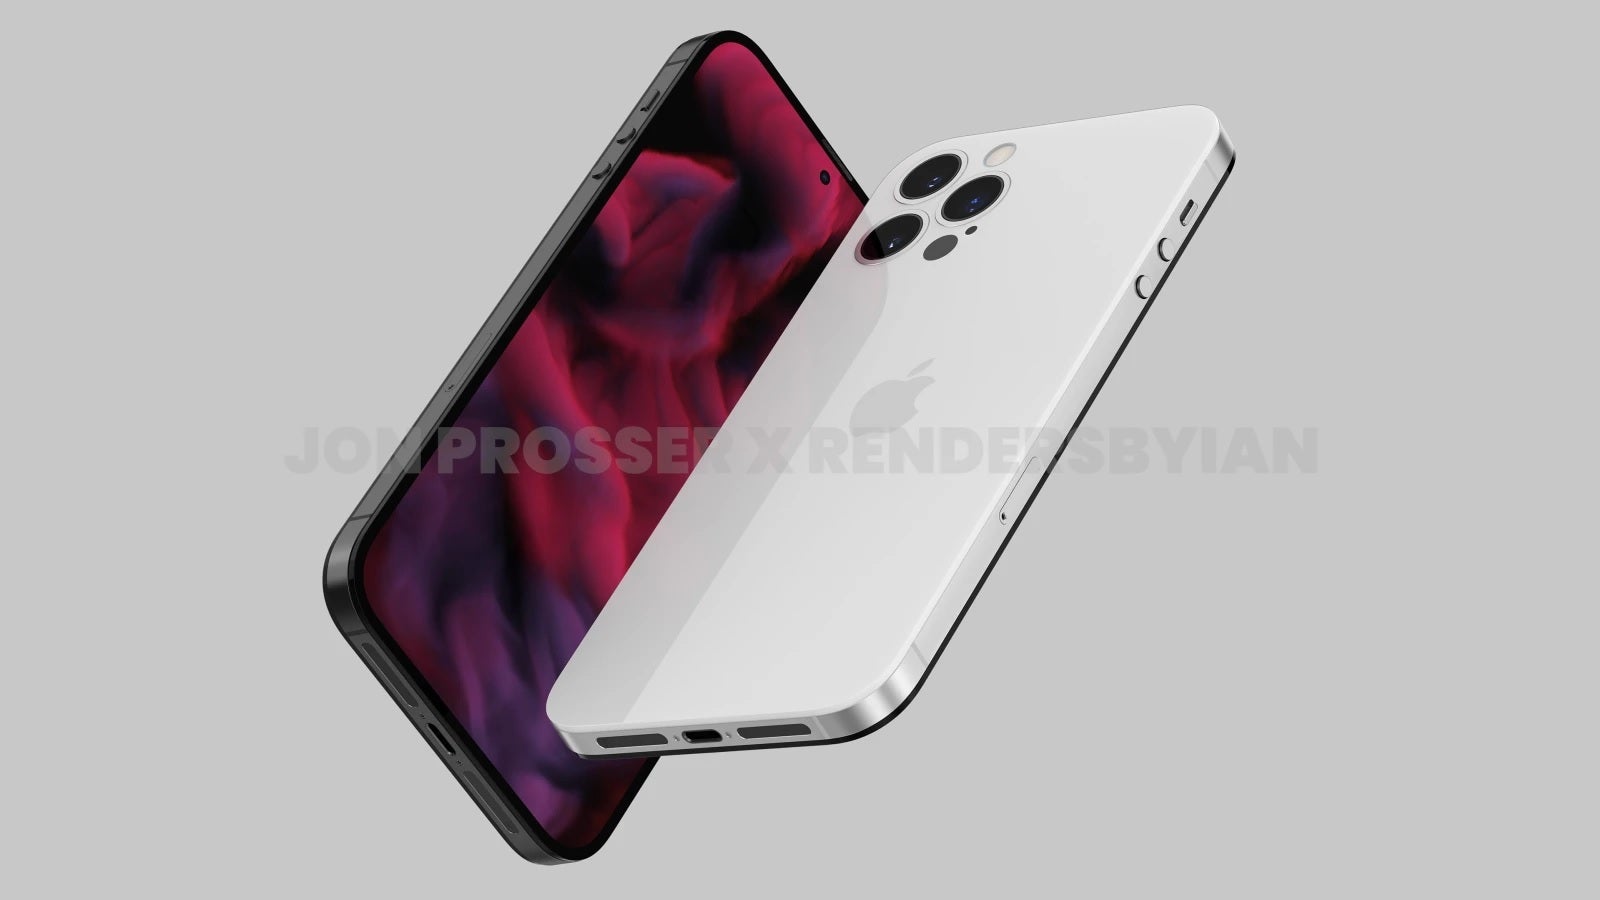 Render of the 2022 iPhone desi - no notch, flush mounted camera module - Gurman: flat-edge Apple Watch could surface eventually; sees new iPad Pro design, AirPods Pro in '22